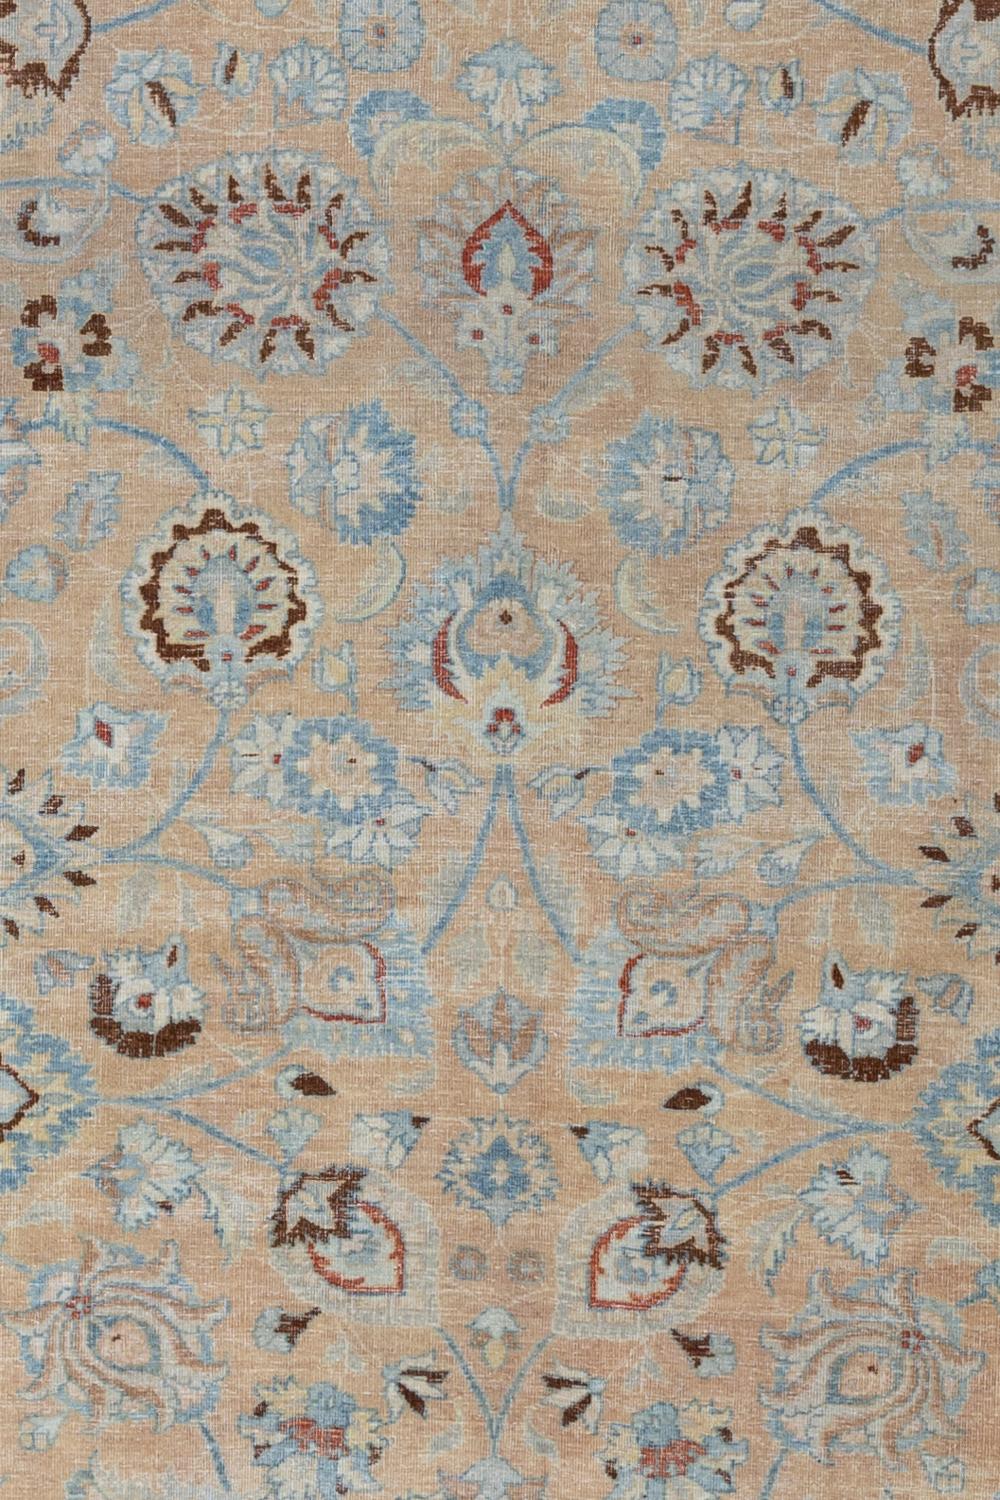 Antique Persian Tabriz, circa 1920. Low, shaved pile. Warm golden yellow field with blue flowers and pops of roses pink.

Wear notes: none

Wear Guide:
Vintage and antique rugs are by nature, pre-loved and may show evidence of their past. There are